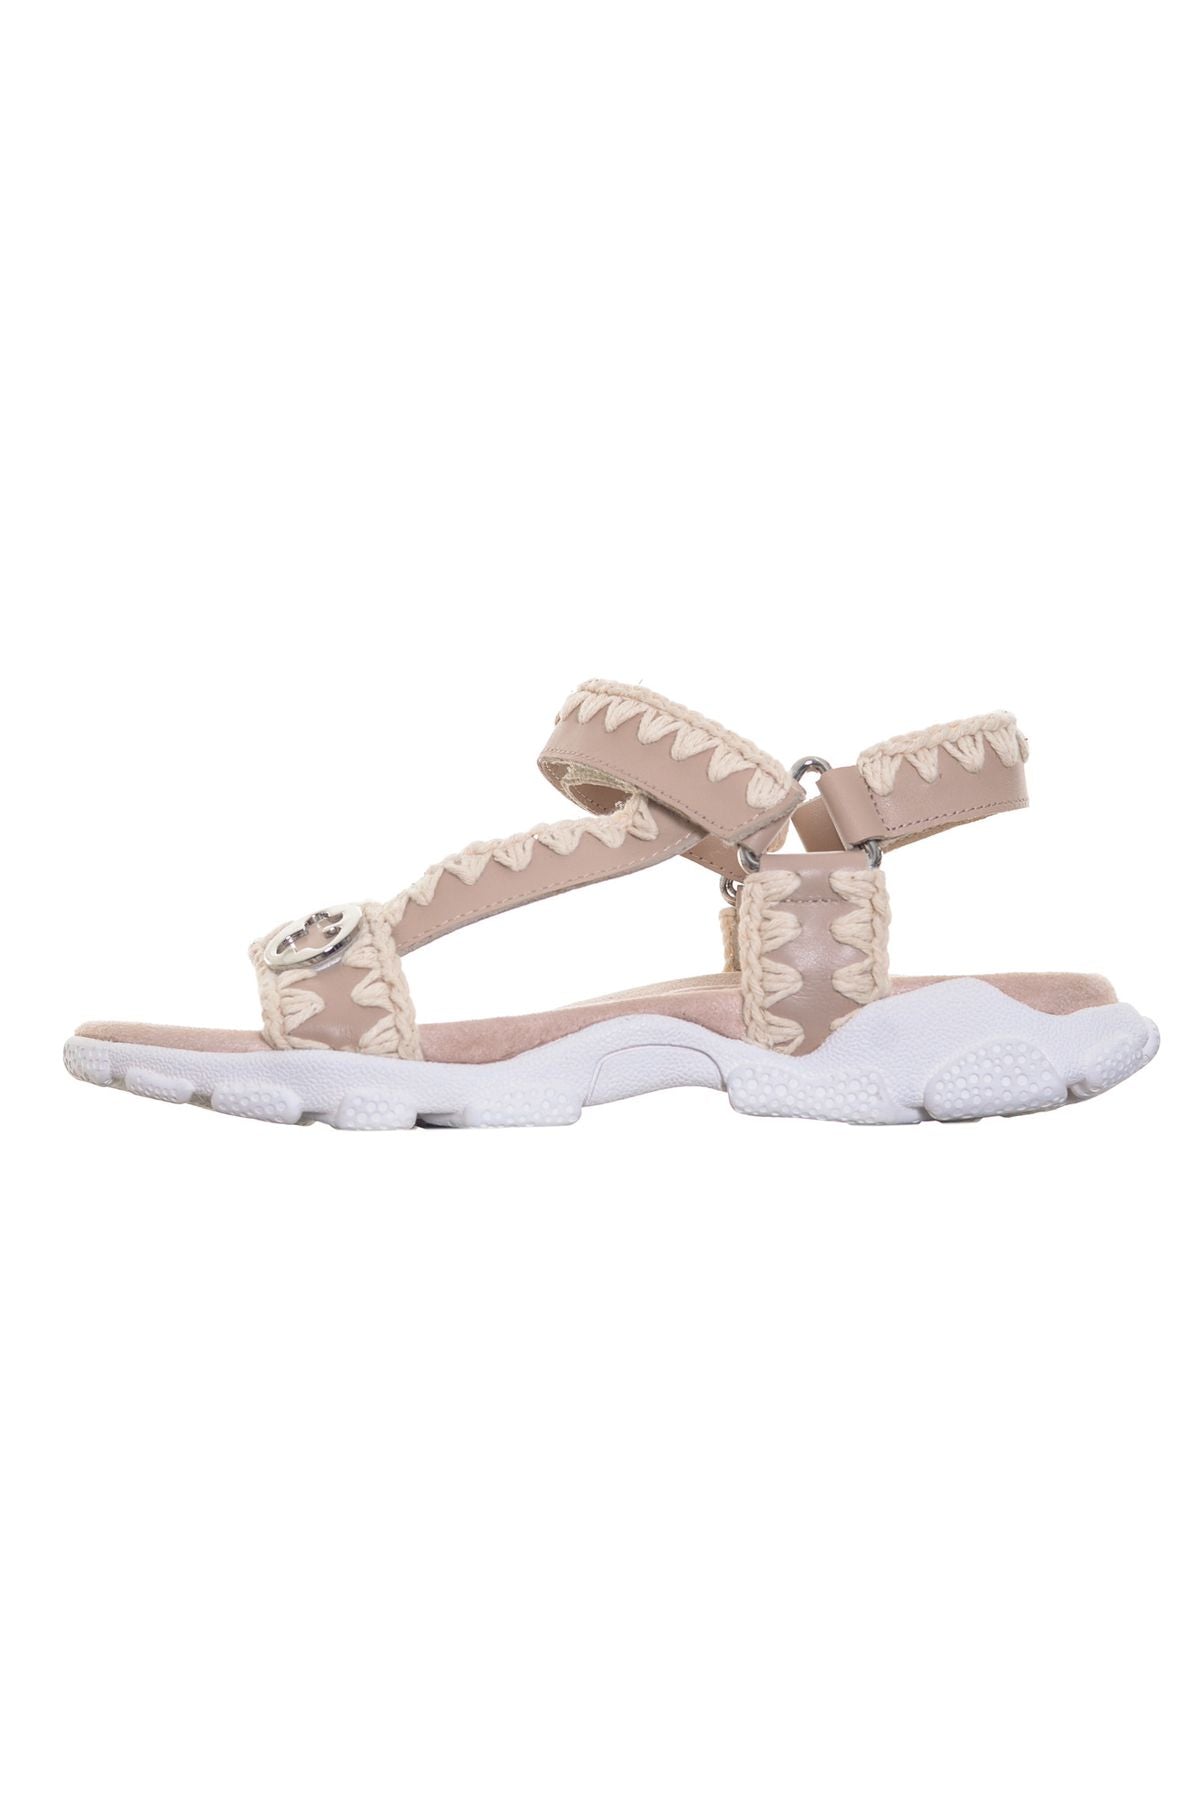 MOU Spring/Summer Sandals musw481000c